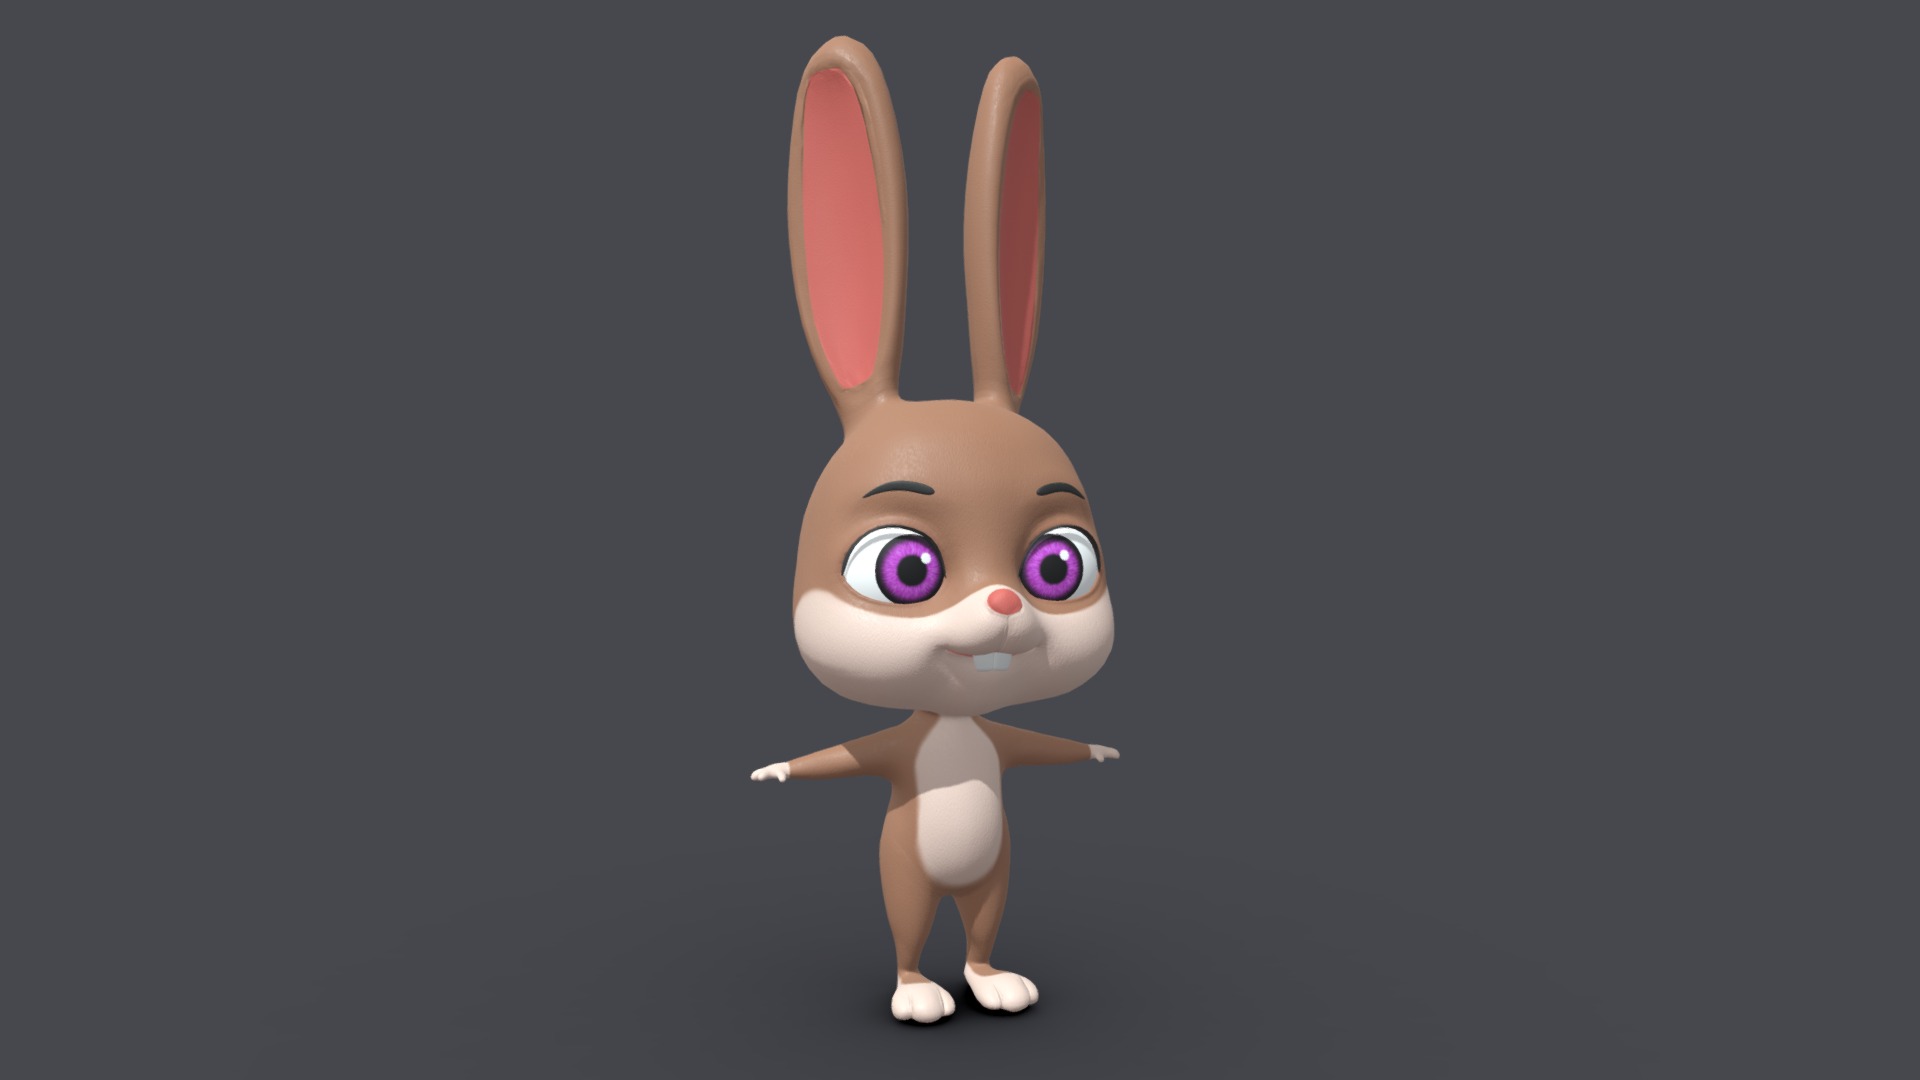 3D model Asset – Cartoons – Animal – Rabbit – Rig 3D - This is a 3D model of the Asset - Cartoons - Animal - Rabbit - Rig 3D. The 3D model is about graphical user interface.